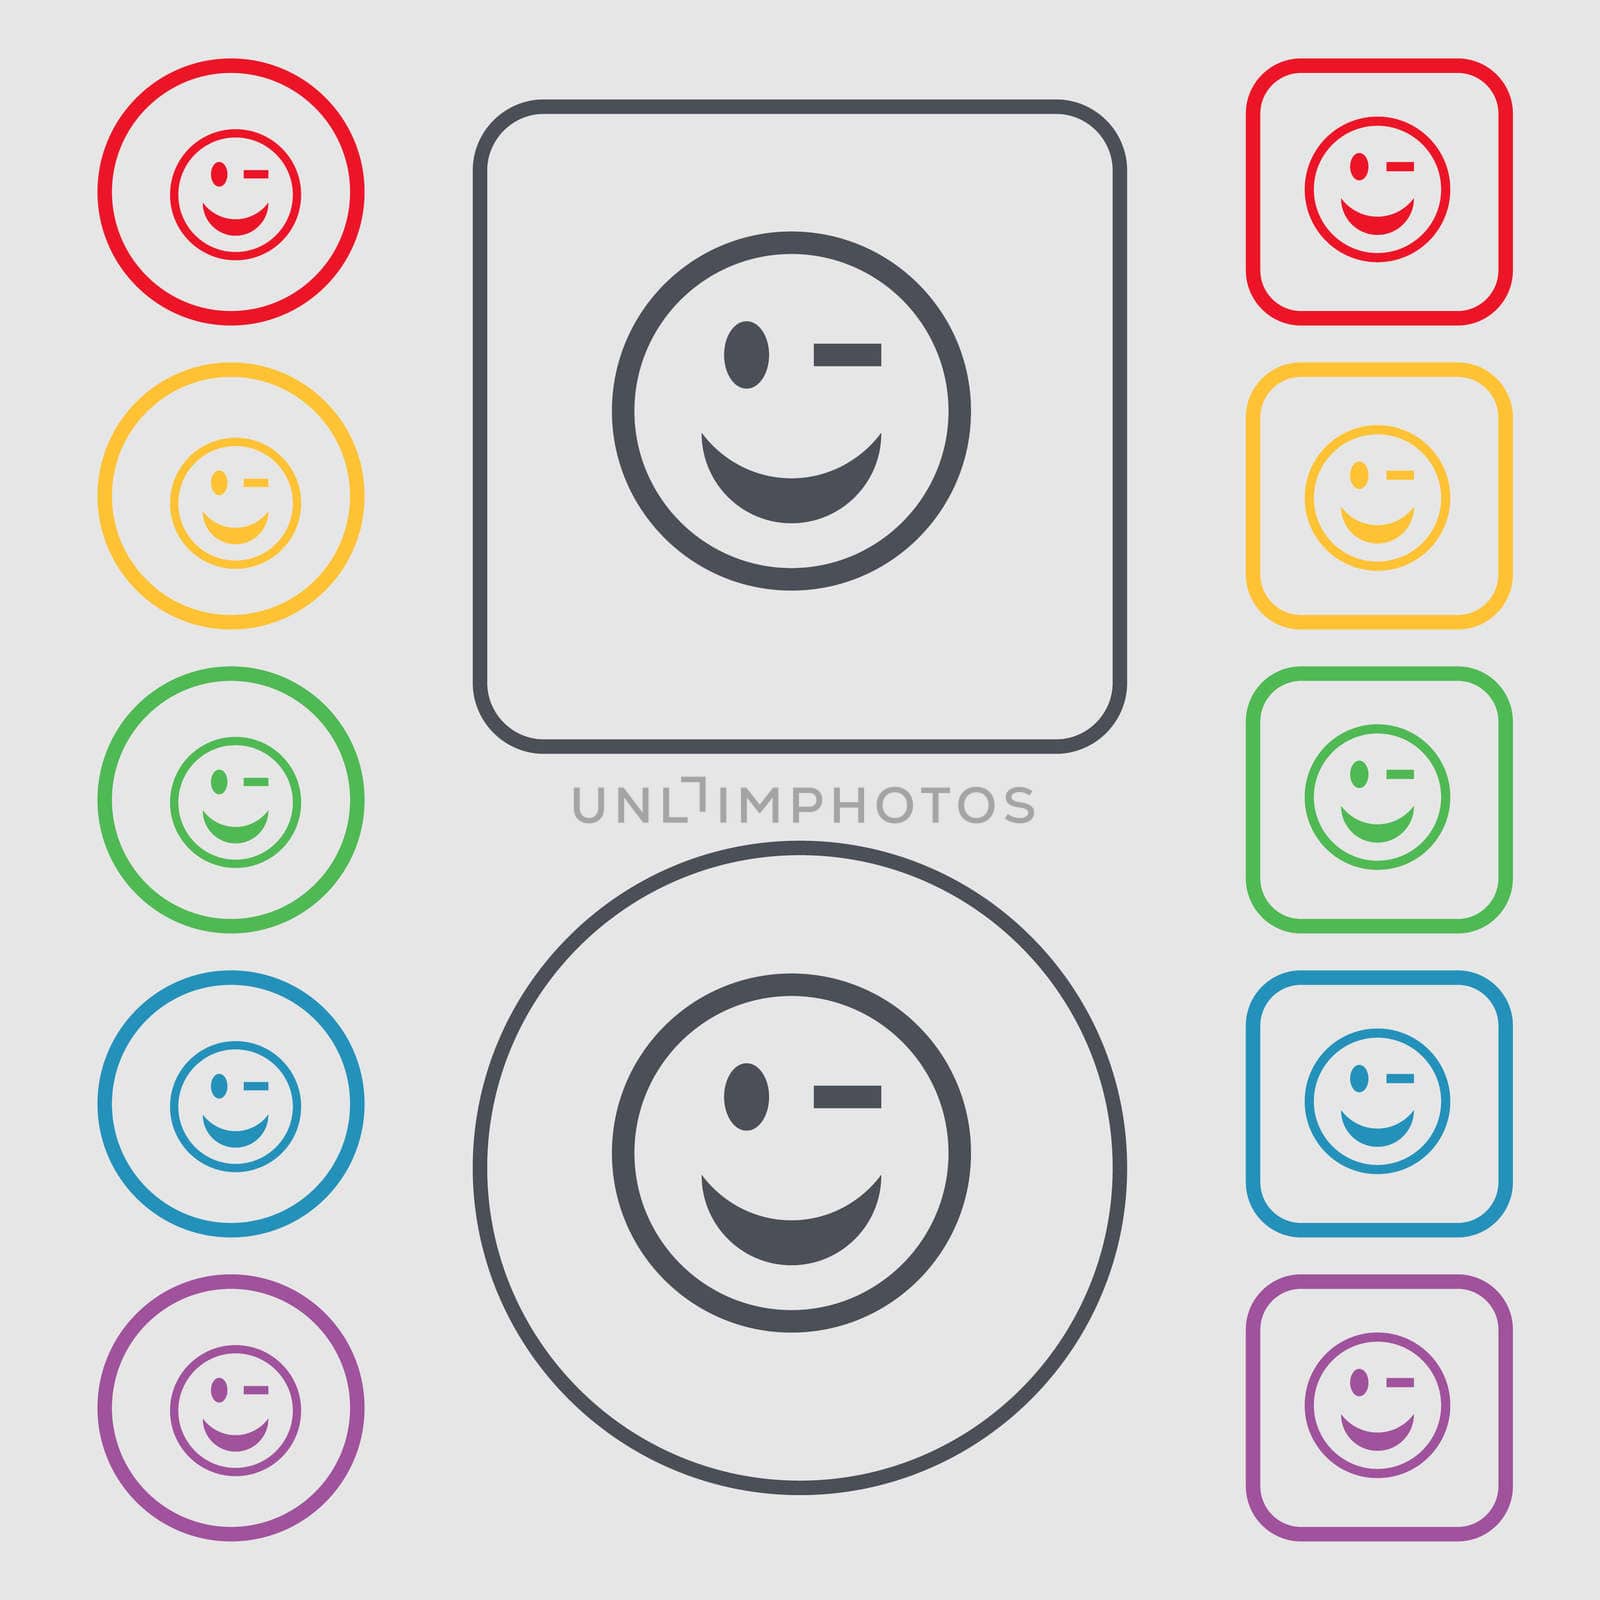 Winking Face icon sign. symbol on the Round and square buttons with frame. illustration